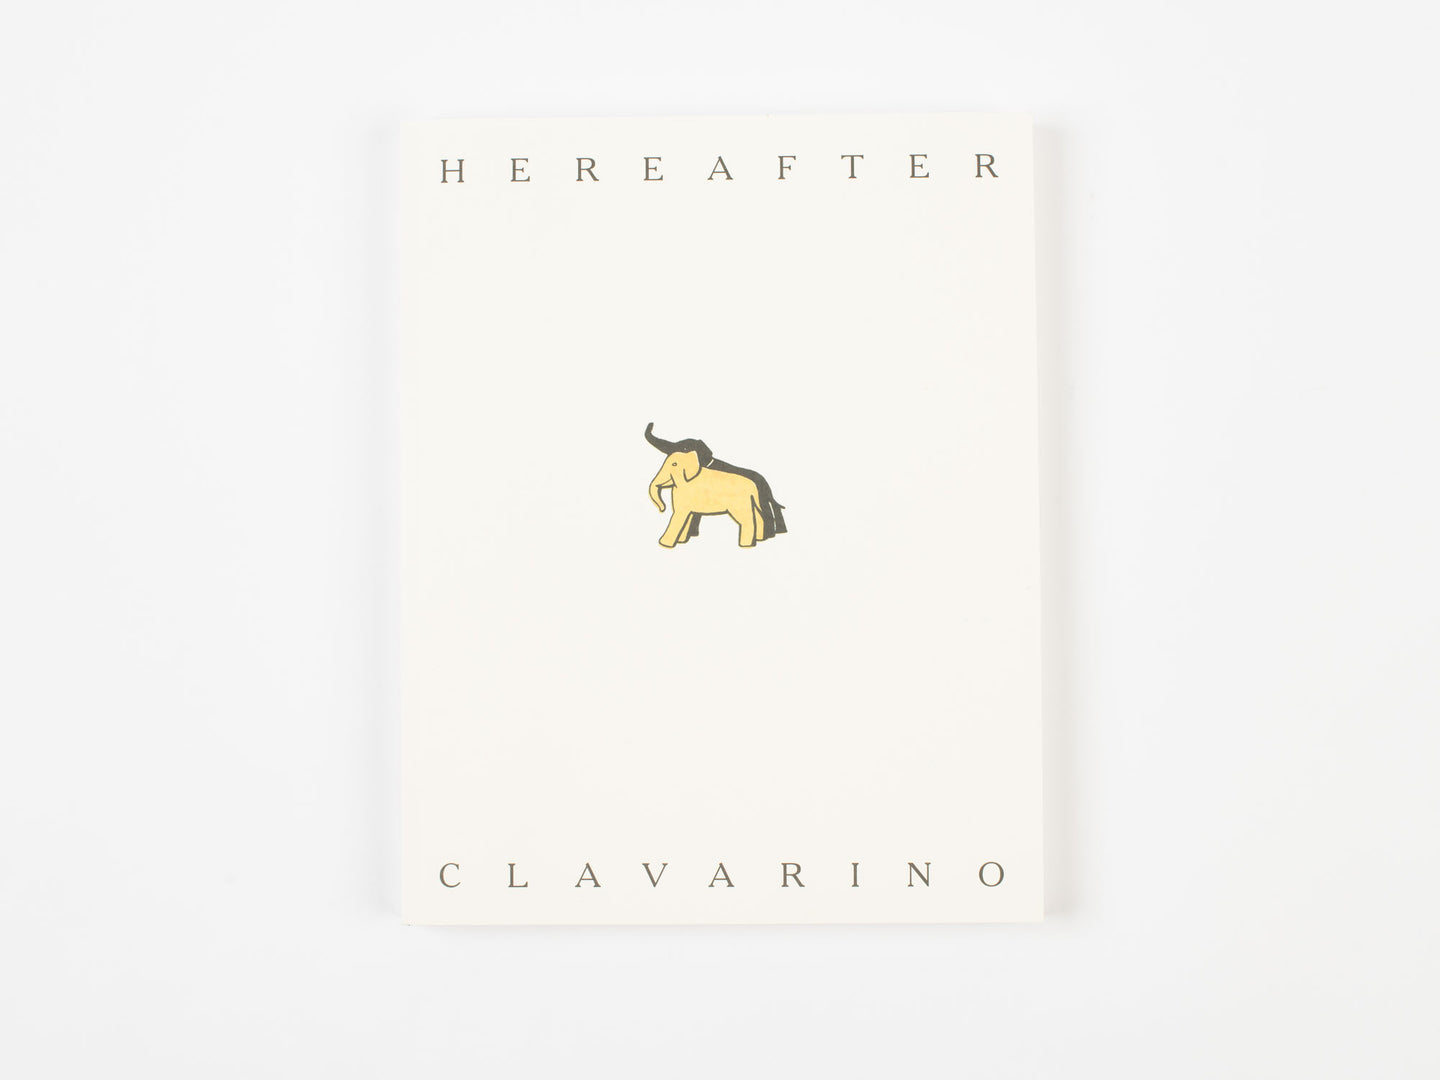 Hereafter by Federico Clavarino